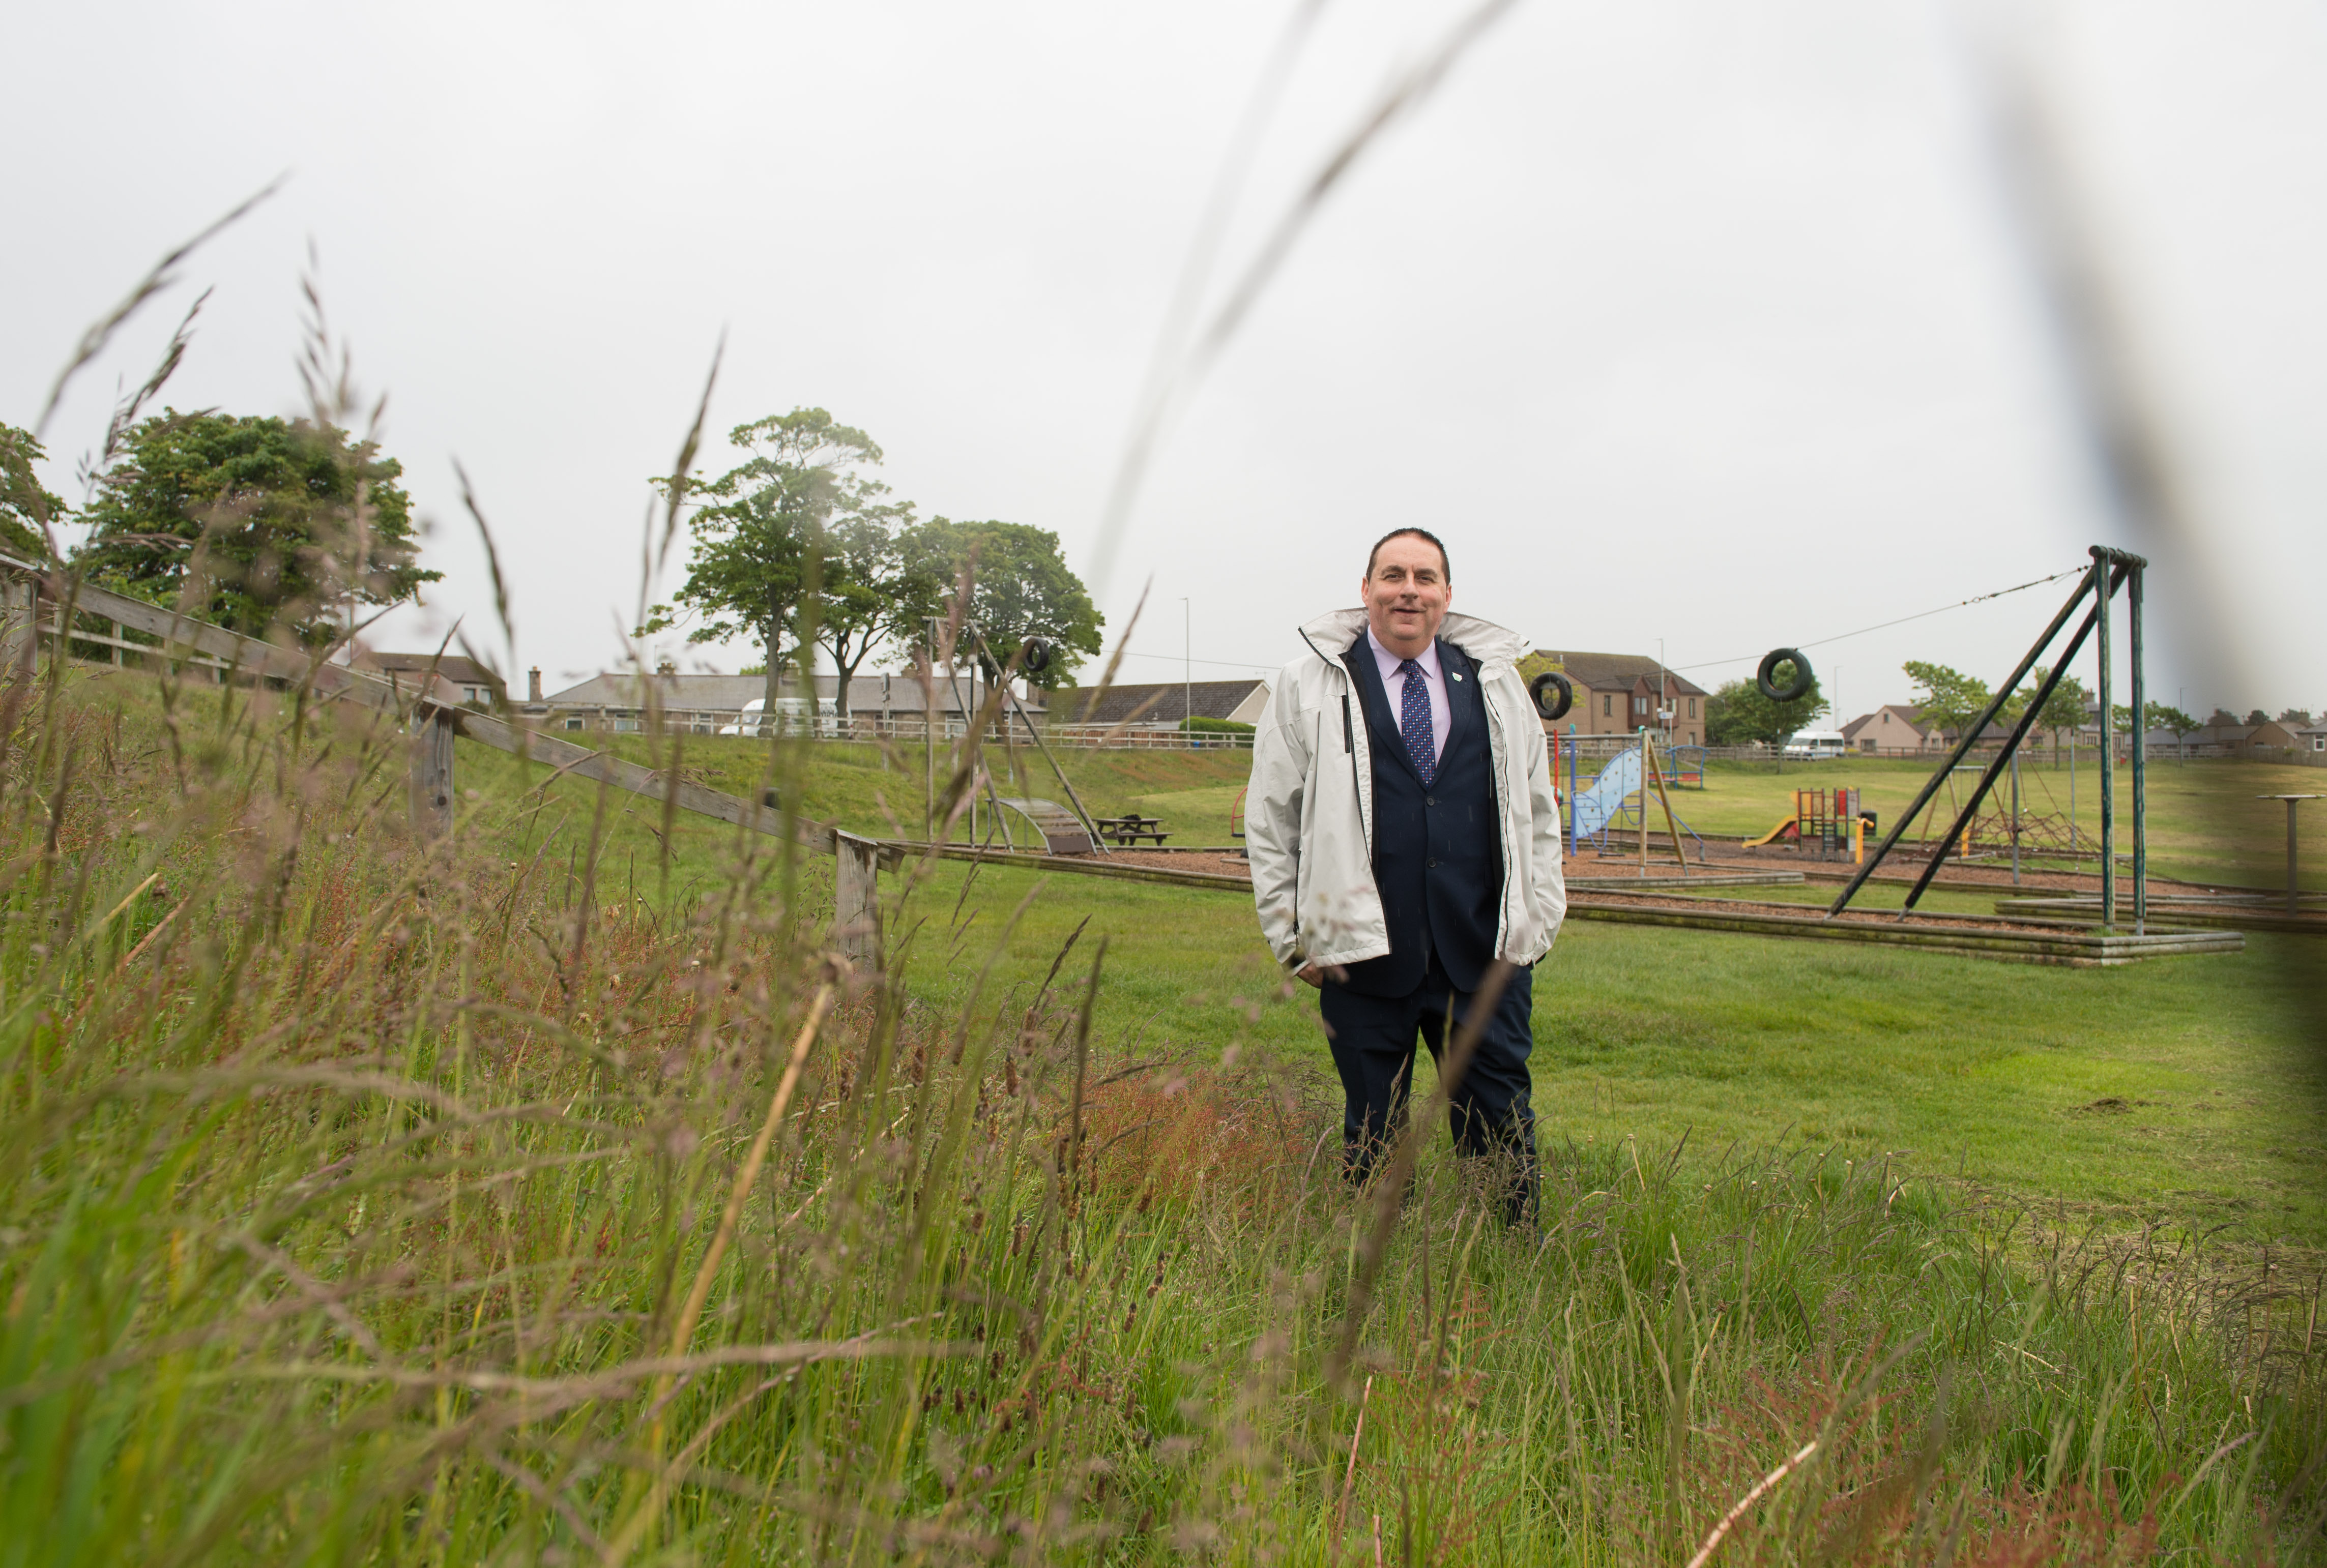 Councillor James Allen is pictured at Lossiemouth playing fields at the site of where the grass has now been cut.